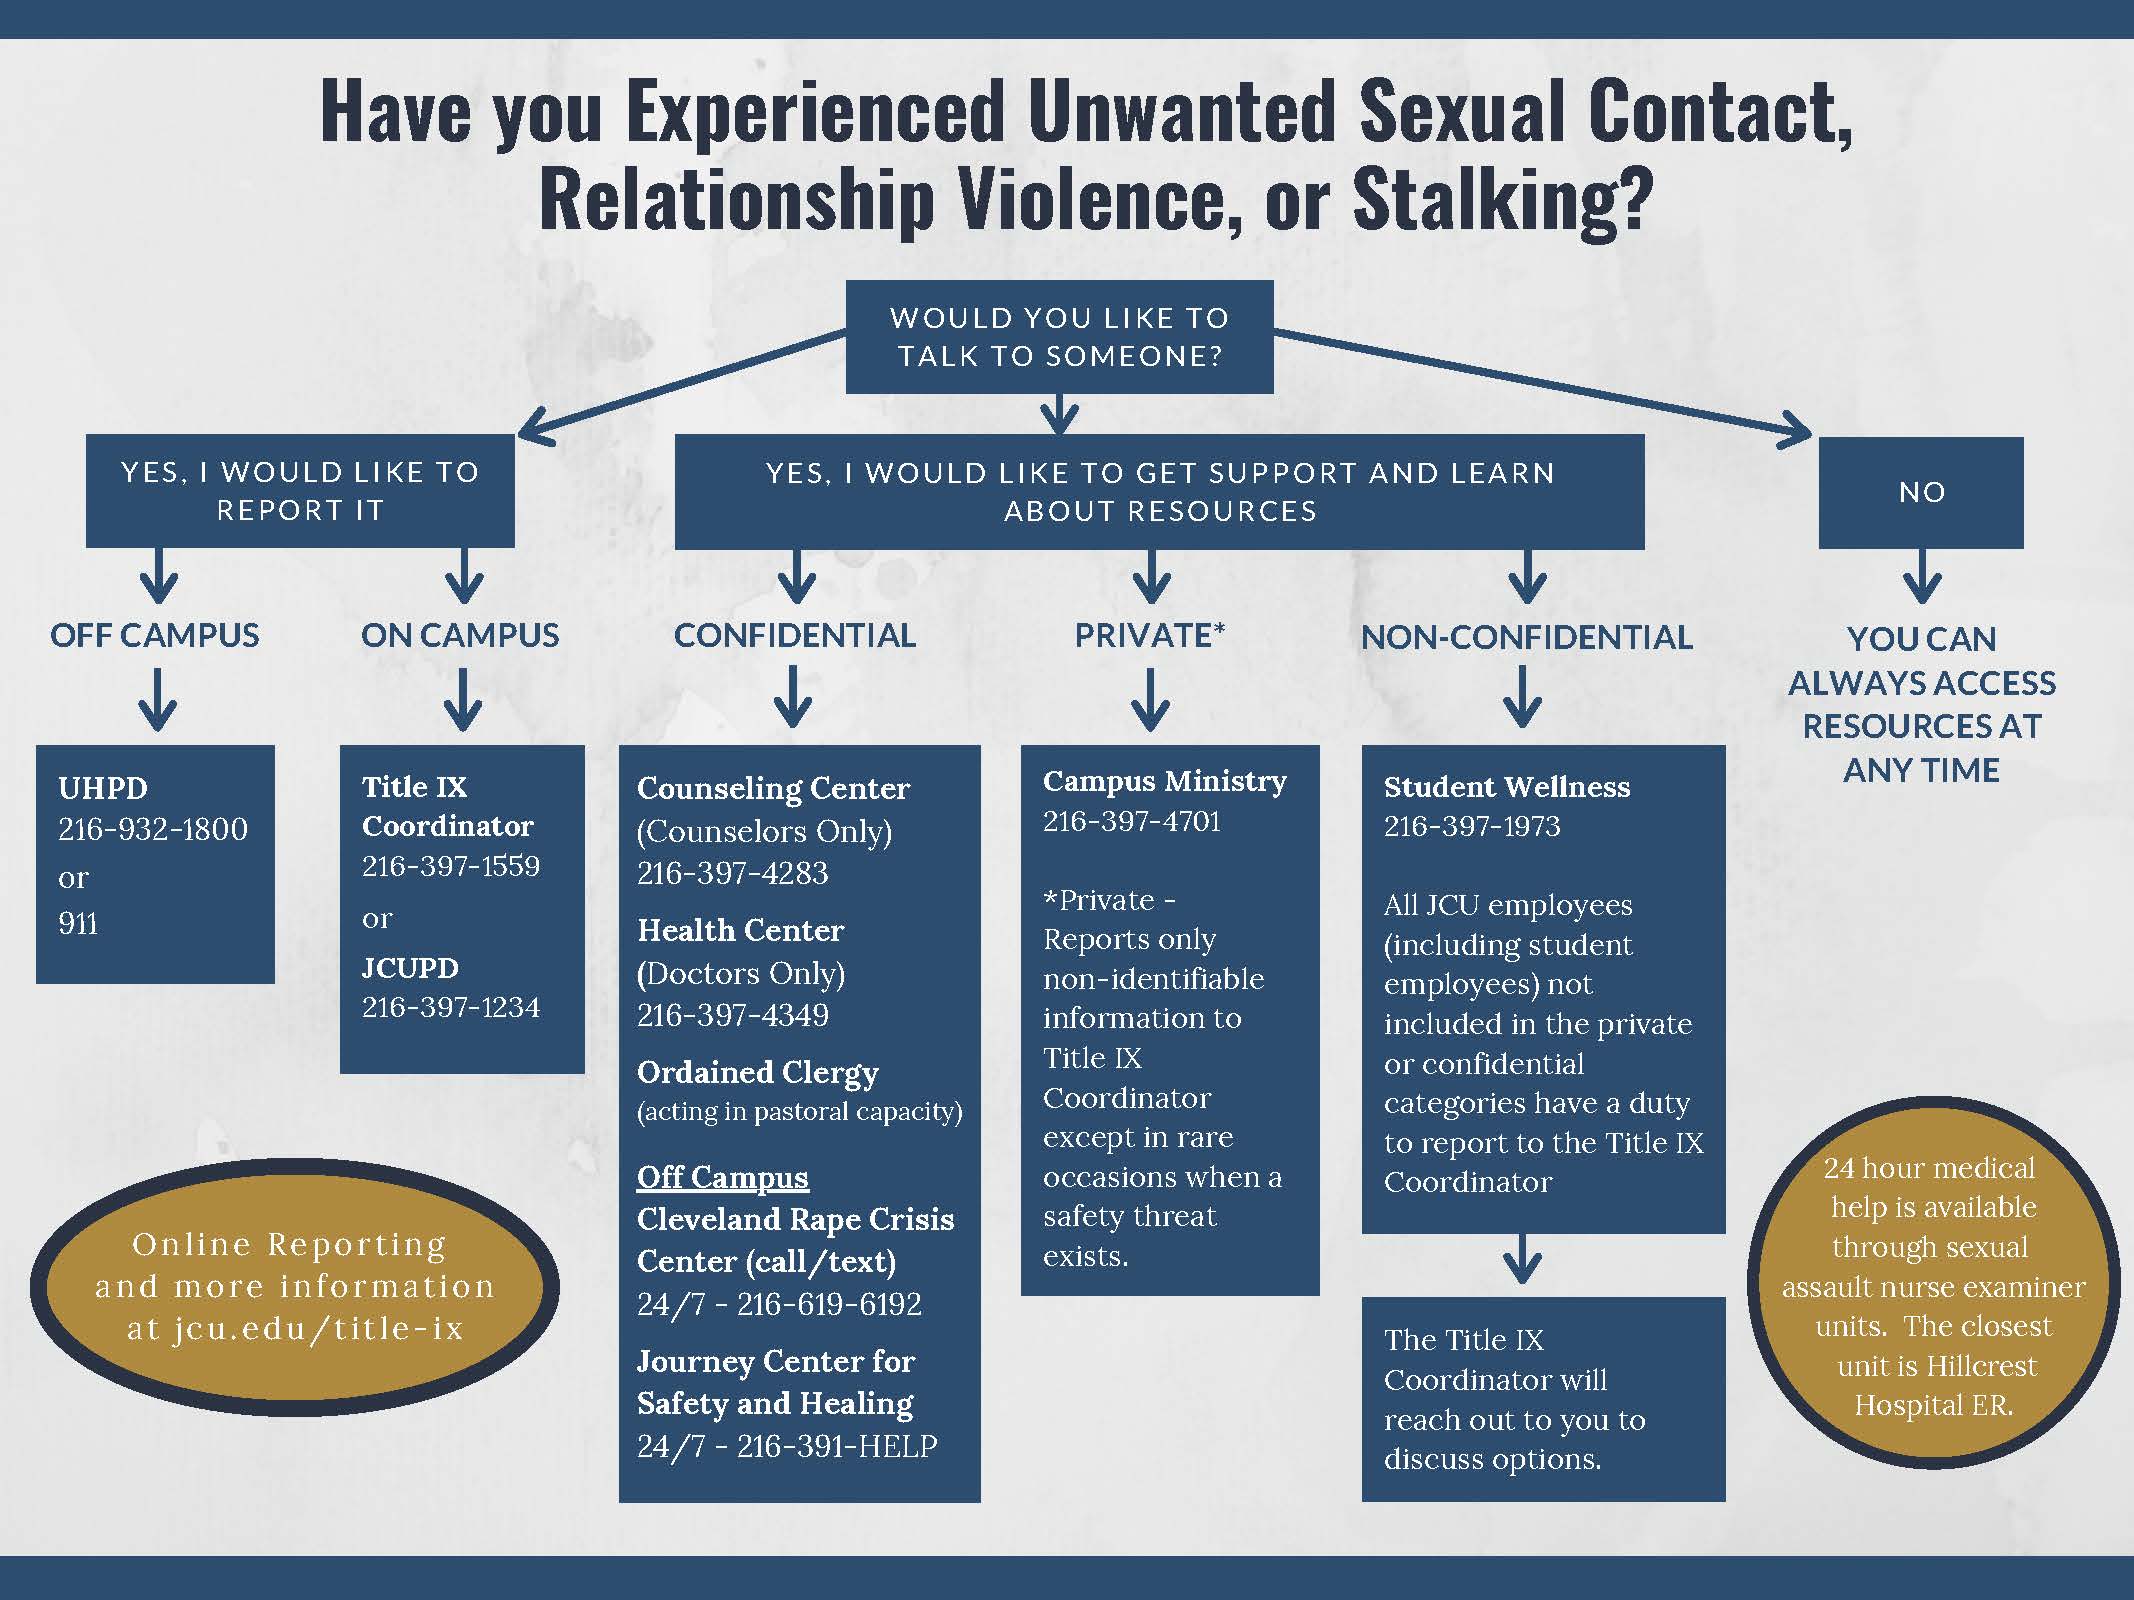 Flow chart describing a person's options after experiencing unwanted sexual contact, relationship violence, or stalking